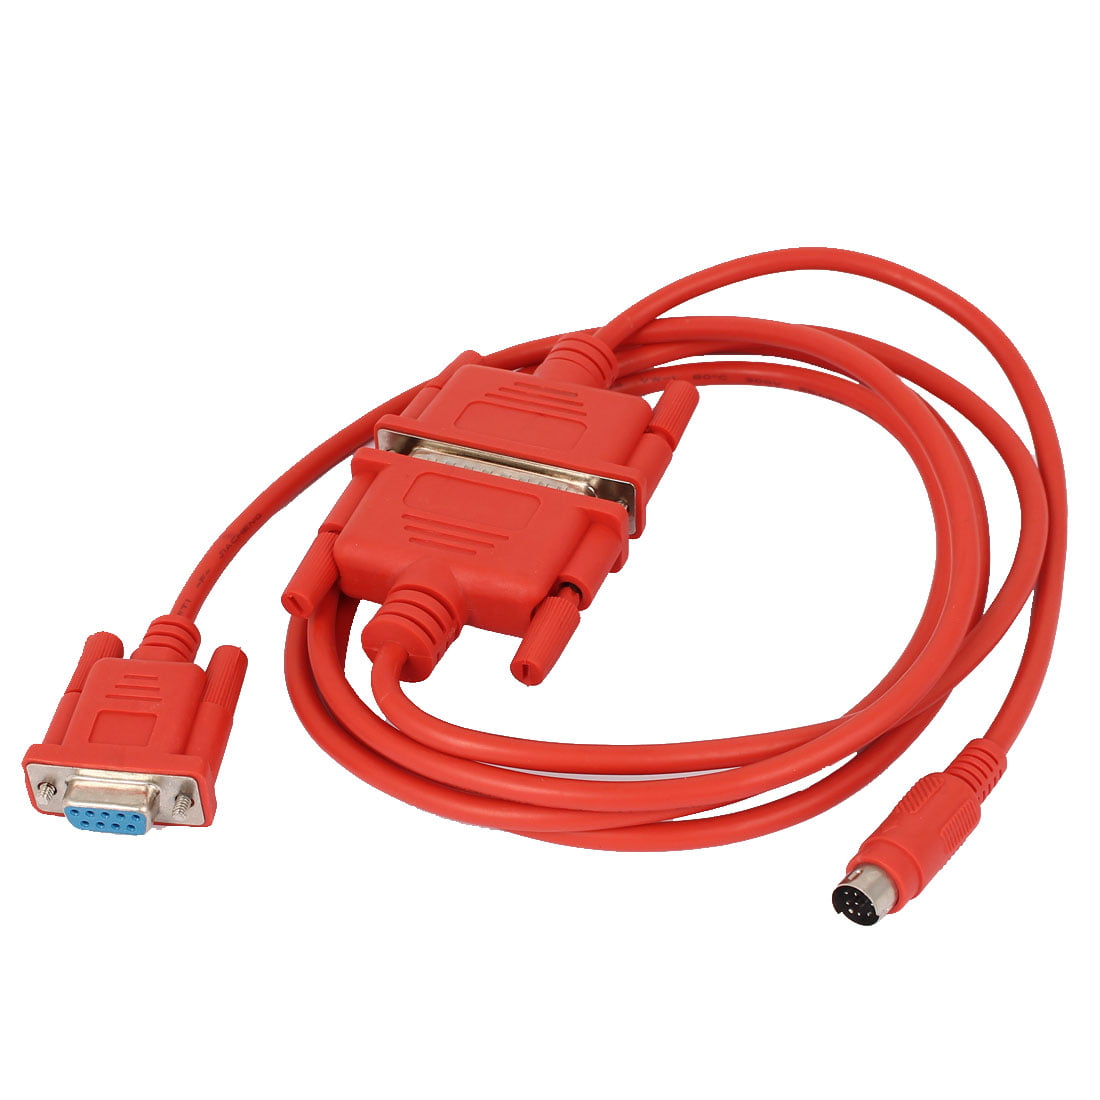 SC-09 SC09 Cable RS232 to RS422 adapter for Mitsubishi MELSEC FX & A series PLC 